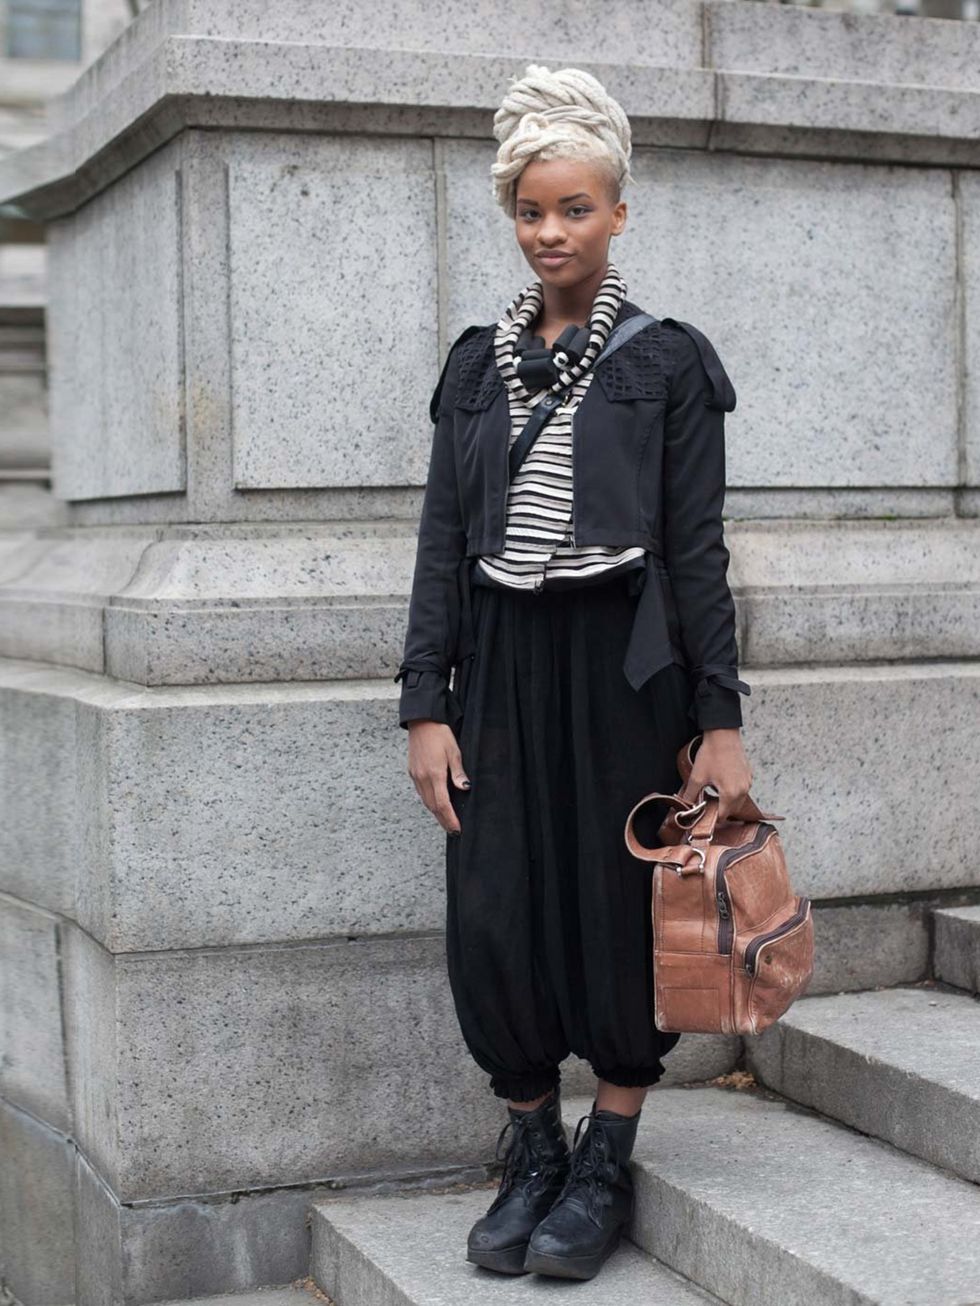 <p>Allison wears Funktional jacket, Thrifted pants and stripe jacket, Y.R.U shoes and a necklace from her own label, Petrichor Designs.</p><p><a href="http://www.elleuk.com/style/street-style/new-york-fashion-week-autumn-winter-13">New York Fashion Week s